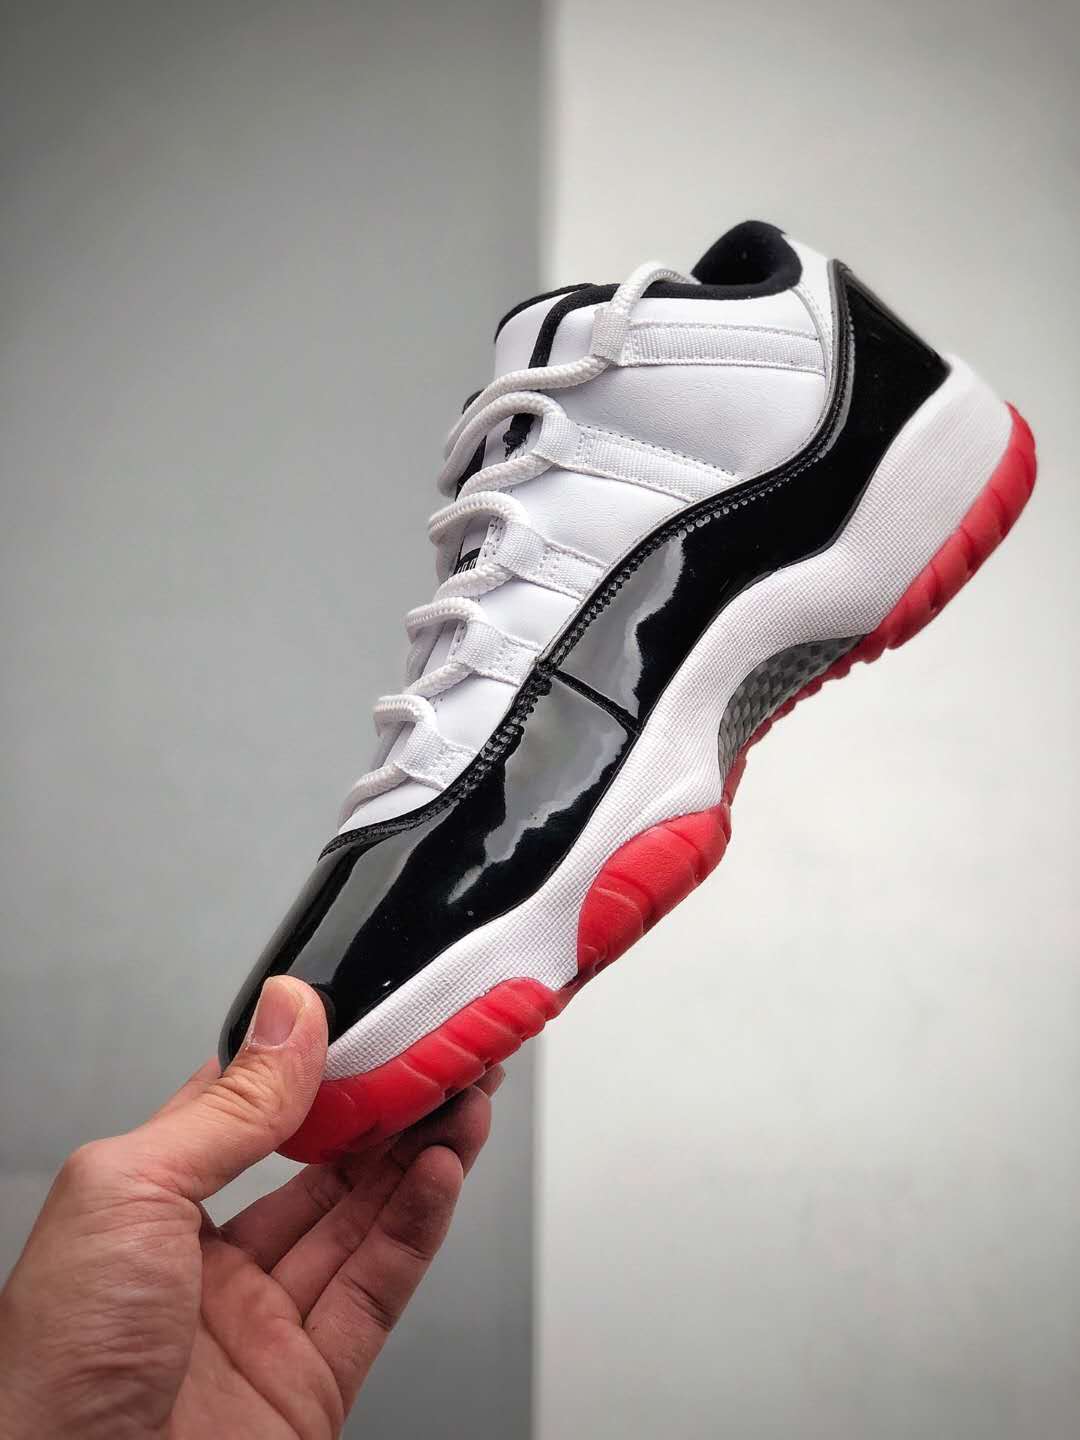 Air Jordan 11 Retro Low 'Concord-Bred' AV2187-160 - Iconic Style and Classic Colorway for the Ultimate Sneaker Enthusiast!